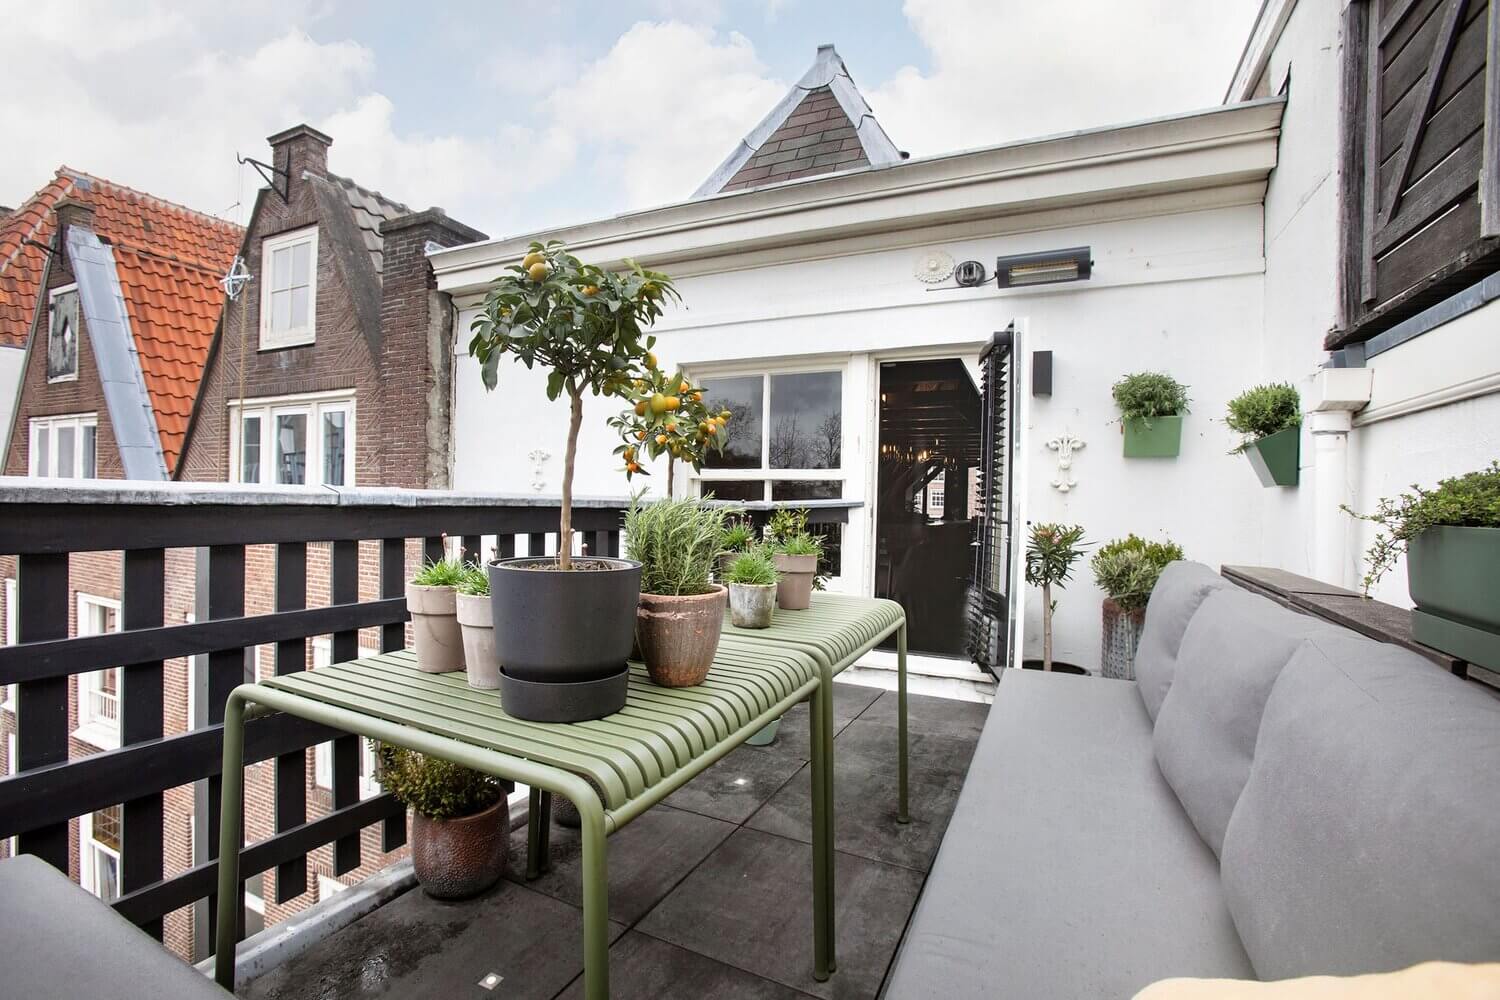 AMoodyandLuxuriousAtticApartmentinAmsterdam TheNordroom13 A Moody and Luxurious Attic Apartment in Amsterdam